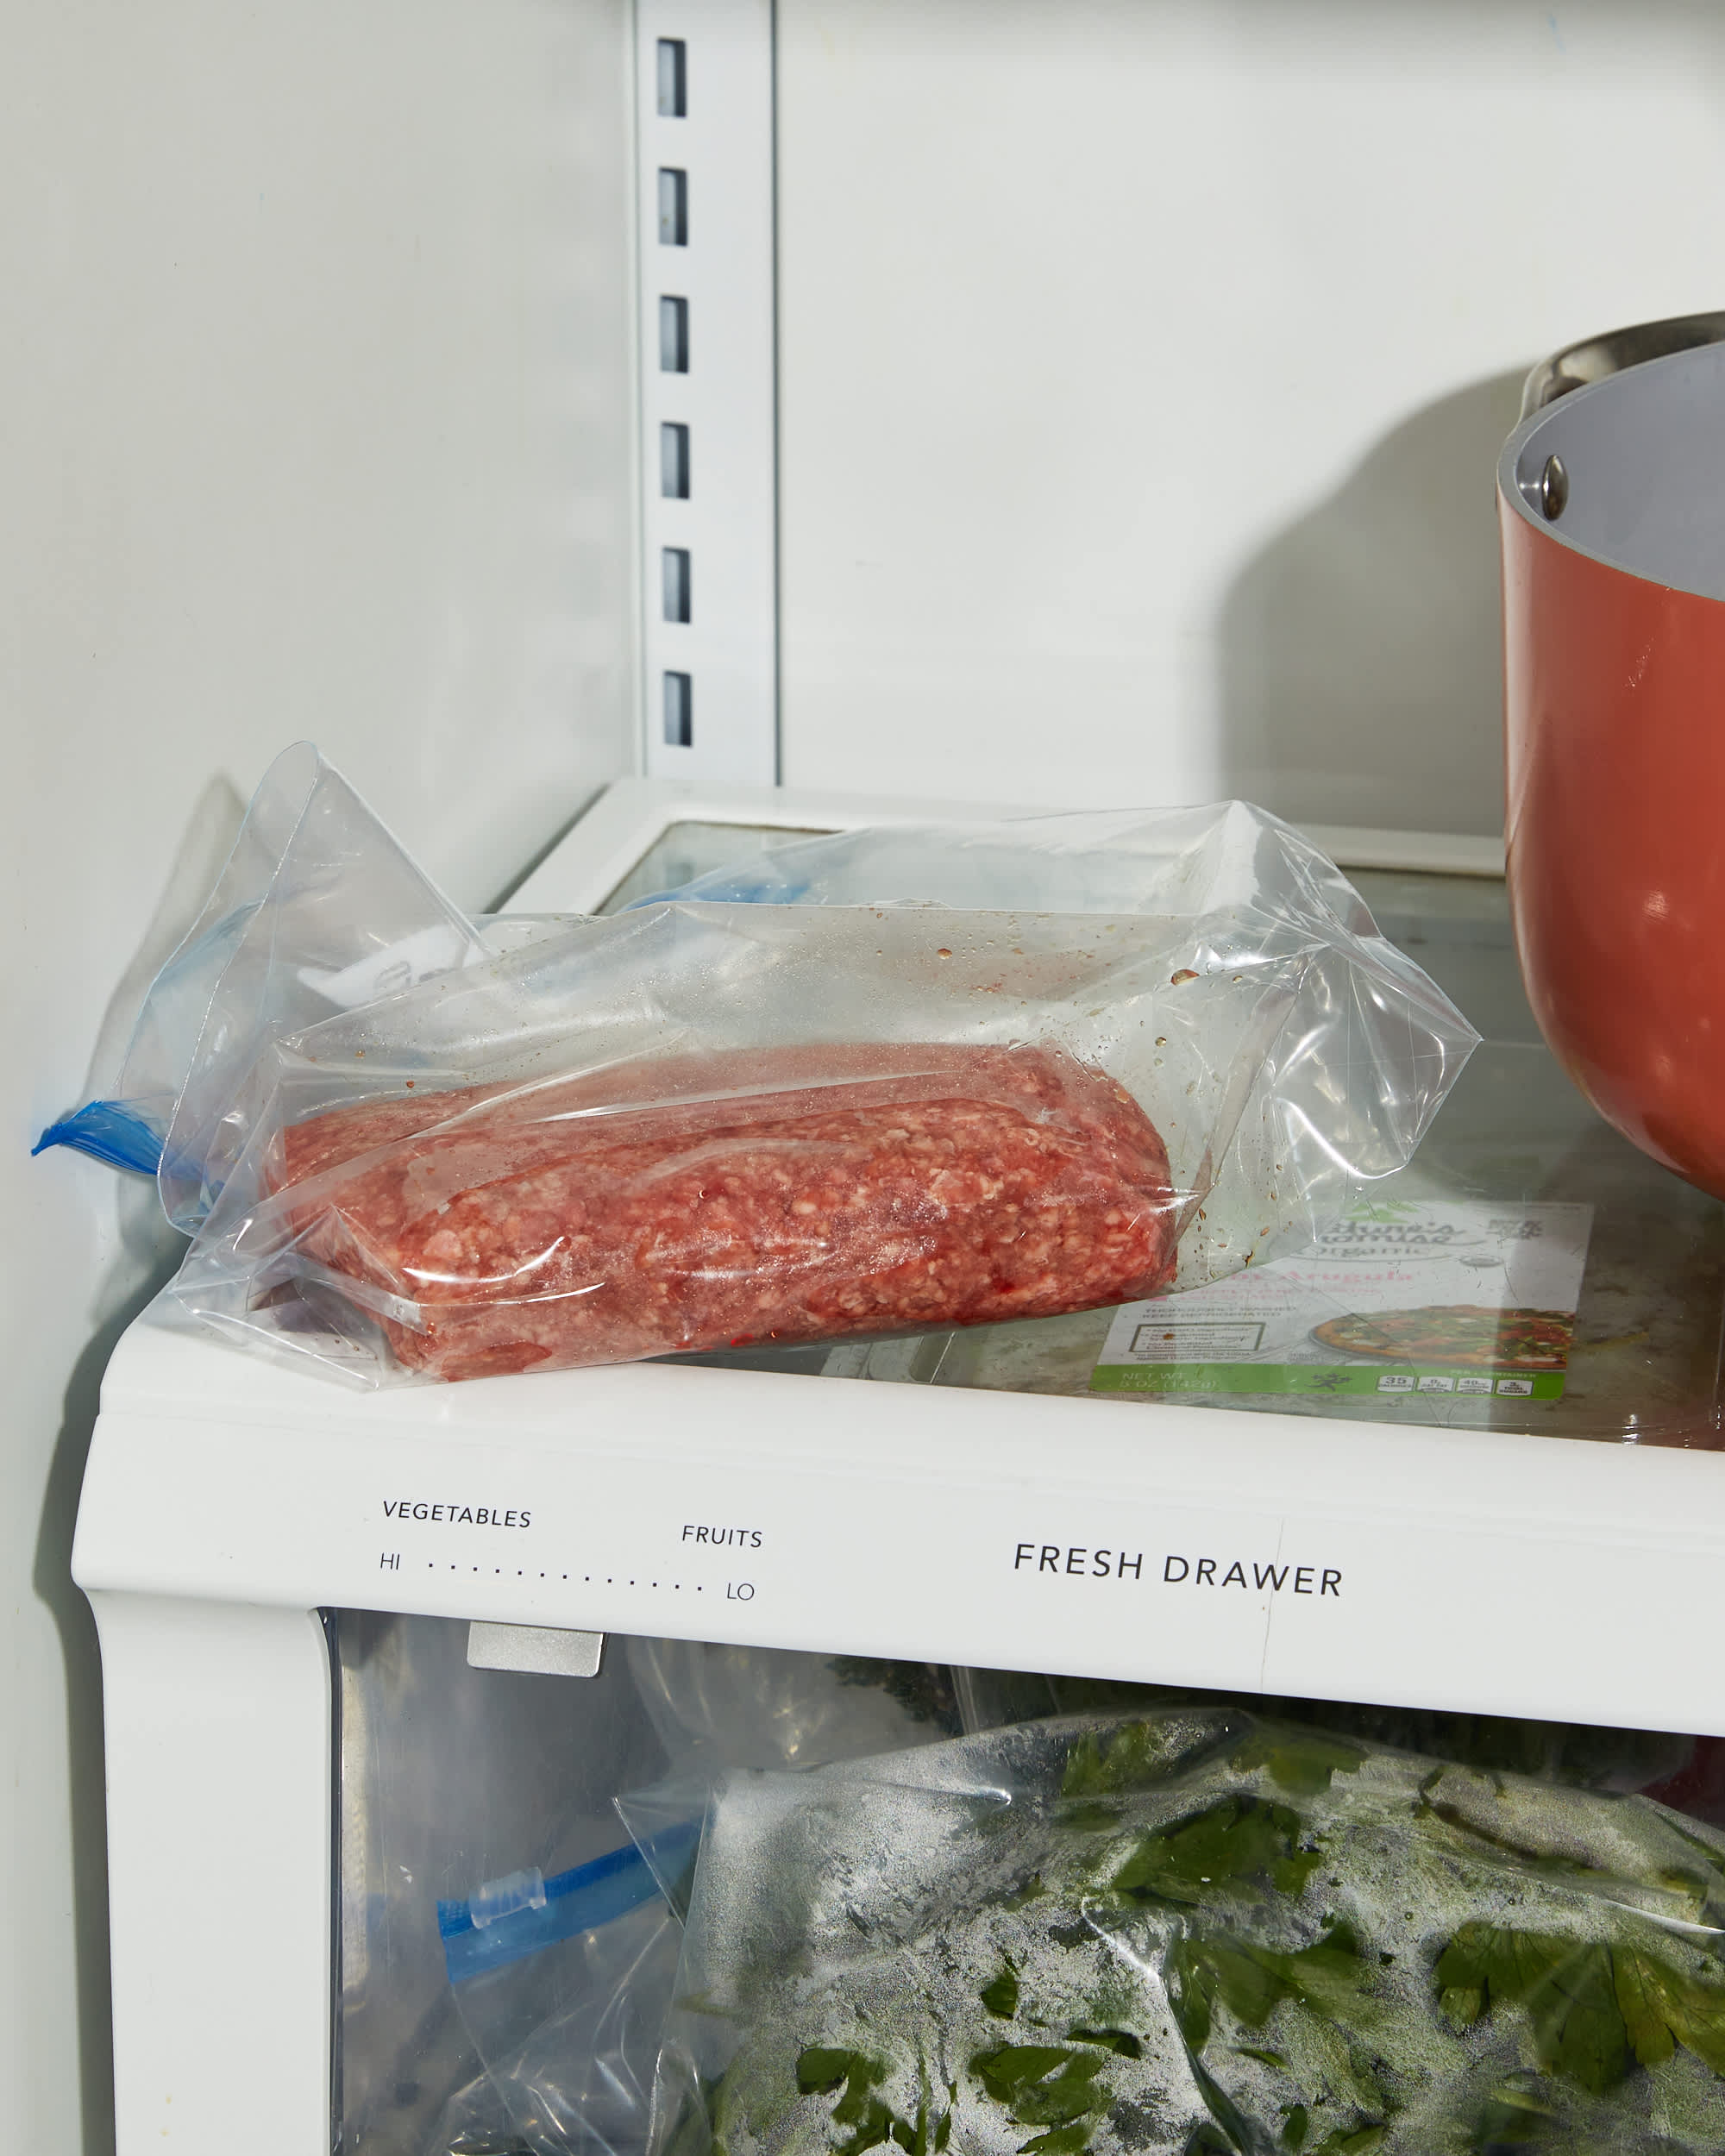 https://cdn.apartmenttherapy.info/image/upload/v1666963512/k/Photo/Recipes/2022-12-how-to-defrost-ground-beef/best_way_to_defrost_ground_beef_method_041.jpg